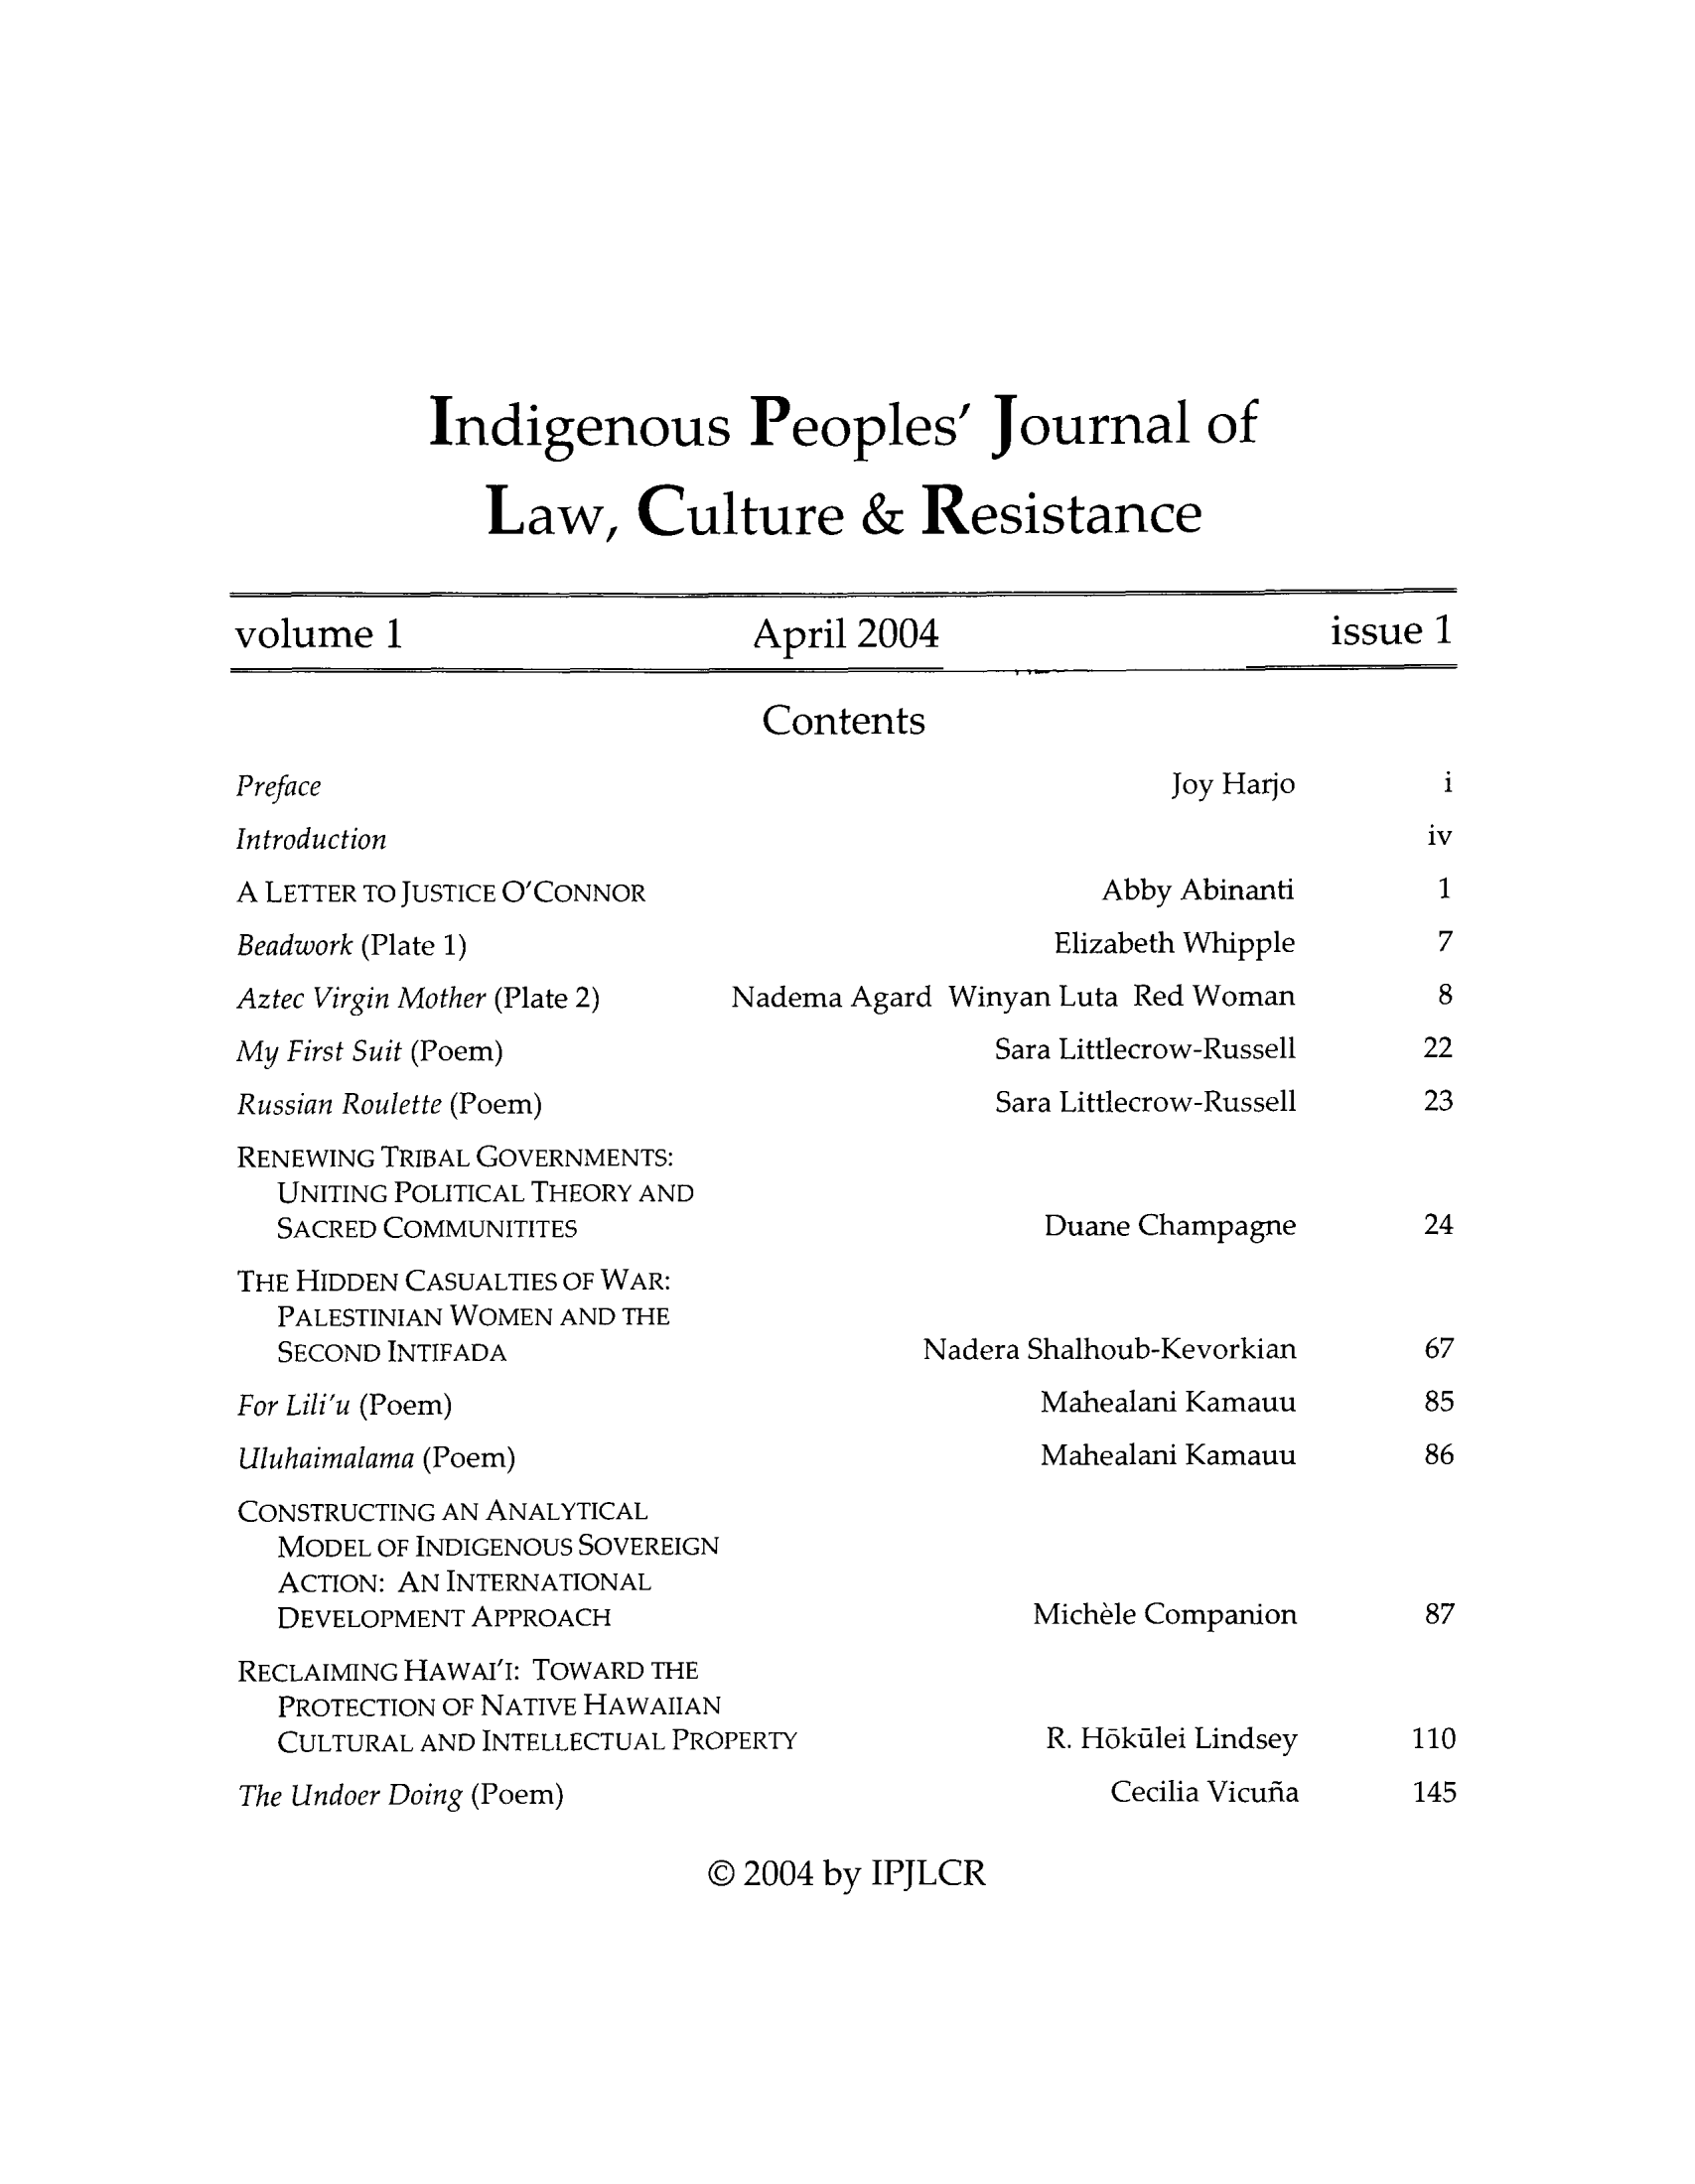 handle is hein.journals/indipeor1 and id is 1 raw text is: Indigenous Peoples' Journal of
Law, Culture & Resistance

volume 1                  April 2004                   issue 1

Contents

Preface
Introduction
A LETTER TO JUSTICE O'CONNOR
Beadwork (Plate 1)
Aztec Virgin Mother (Plate 2)  Nade
My First Suit (Poem)
Russian Roulette (Poem)
RENEWING TRIBAL GOVERNMENTS:
UNITING POLITICAL THEORY AND
SACRED COMMUNITITES
THE HIDDEN CASUALTIES OF WAR:
PALESTINIAN WOMEN AND THE
SECOND INTIFADA
For Lili'u (Poem)
Uluhaimalama (Poem)
CONSTRUCTING AN ANALYTICAL
MODEL OF INDIGENOUS SOVEREIGN
ACTION: AN INTERNATIONAL
DEVELOPMENT APPROACH
RECLAIMING HAWAI'I: TOWARD THE
PROTECTION OF NATIVE HAWAIIAN
CULTURAL AND INTELLECTUAL PROPERTY
The Undoer Doing (Poem)

Joy Harjo

Abby Abinanti
Elizabeth Whipple
ma Agard Winyan Luta Red Woman
Sara Littlecrow-Russell
Sara Littlecrow-Russell
Duane Champagne

Nadera Shalhoub-Kevorkian
Mahealani Kamauu
Mahealani Kamauu

Michele Companion
R. Hokilei Lindsey
Cecilia Vicufia

@ 2004 by IPJLCR

i

iv
1
7
8
22
23

24
67
85
86

87

110
145


